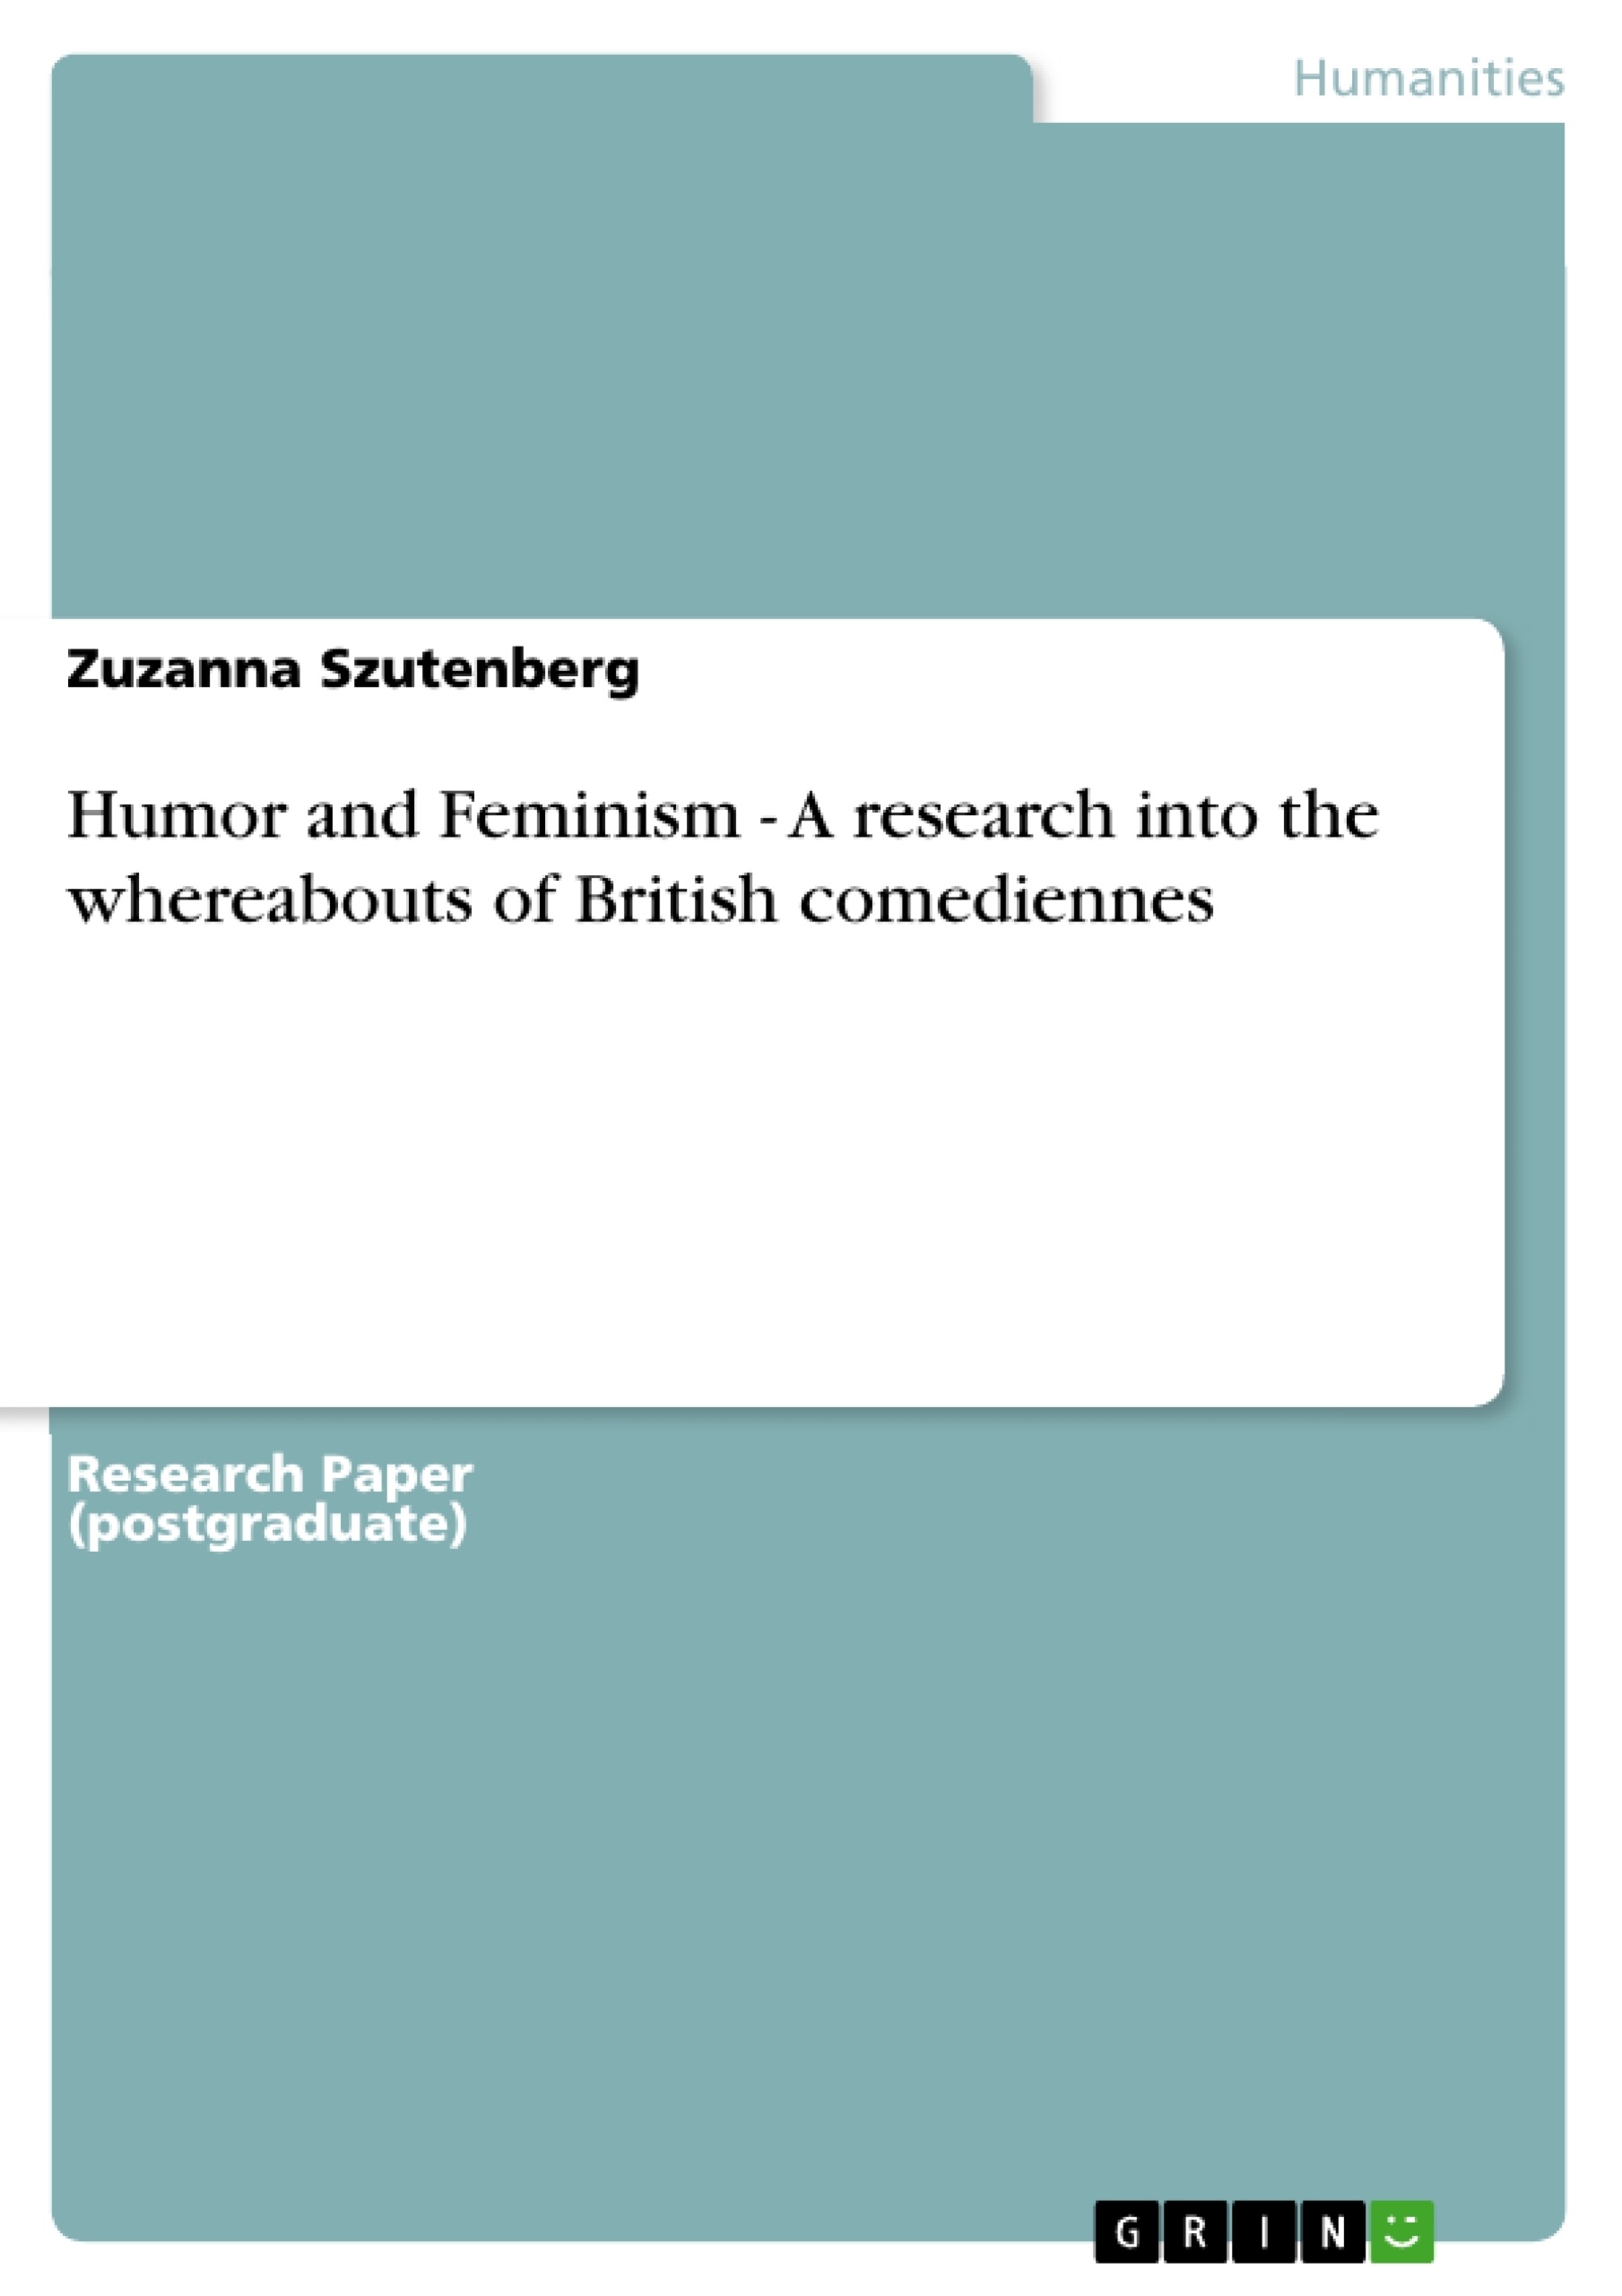 Title: Humor and Feminism - A research into the whereabouts of British comediennes